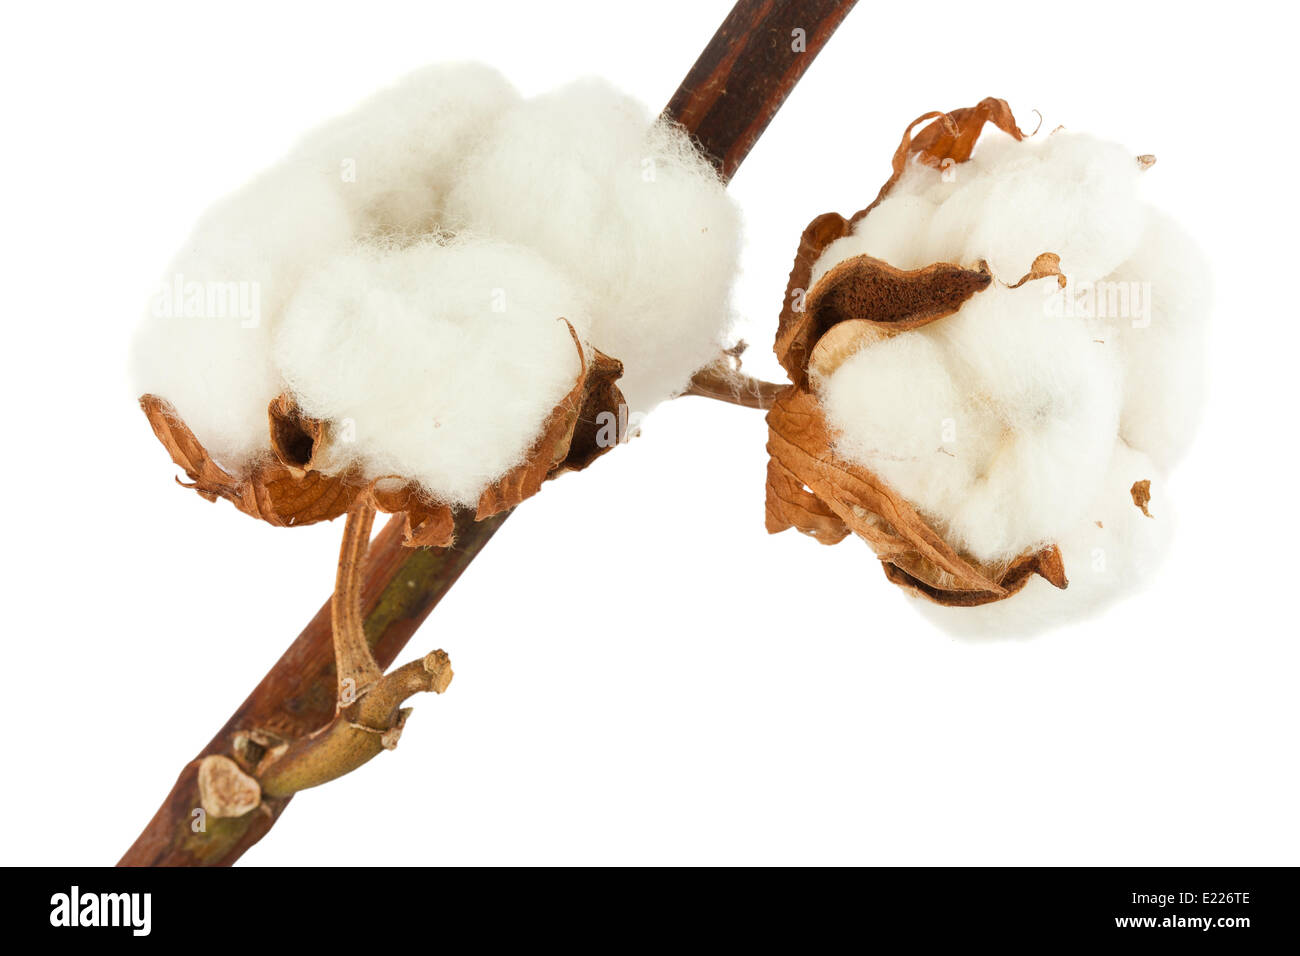 Cotton plant with bolls Stock Photo